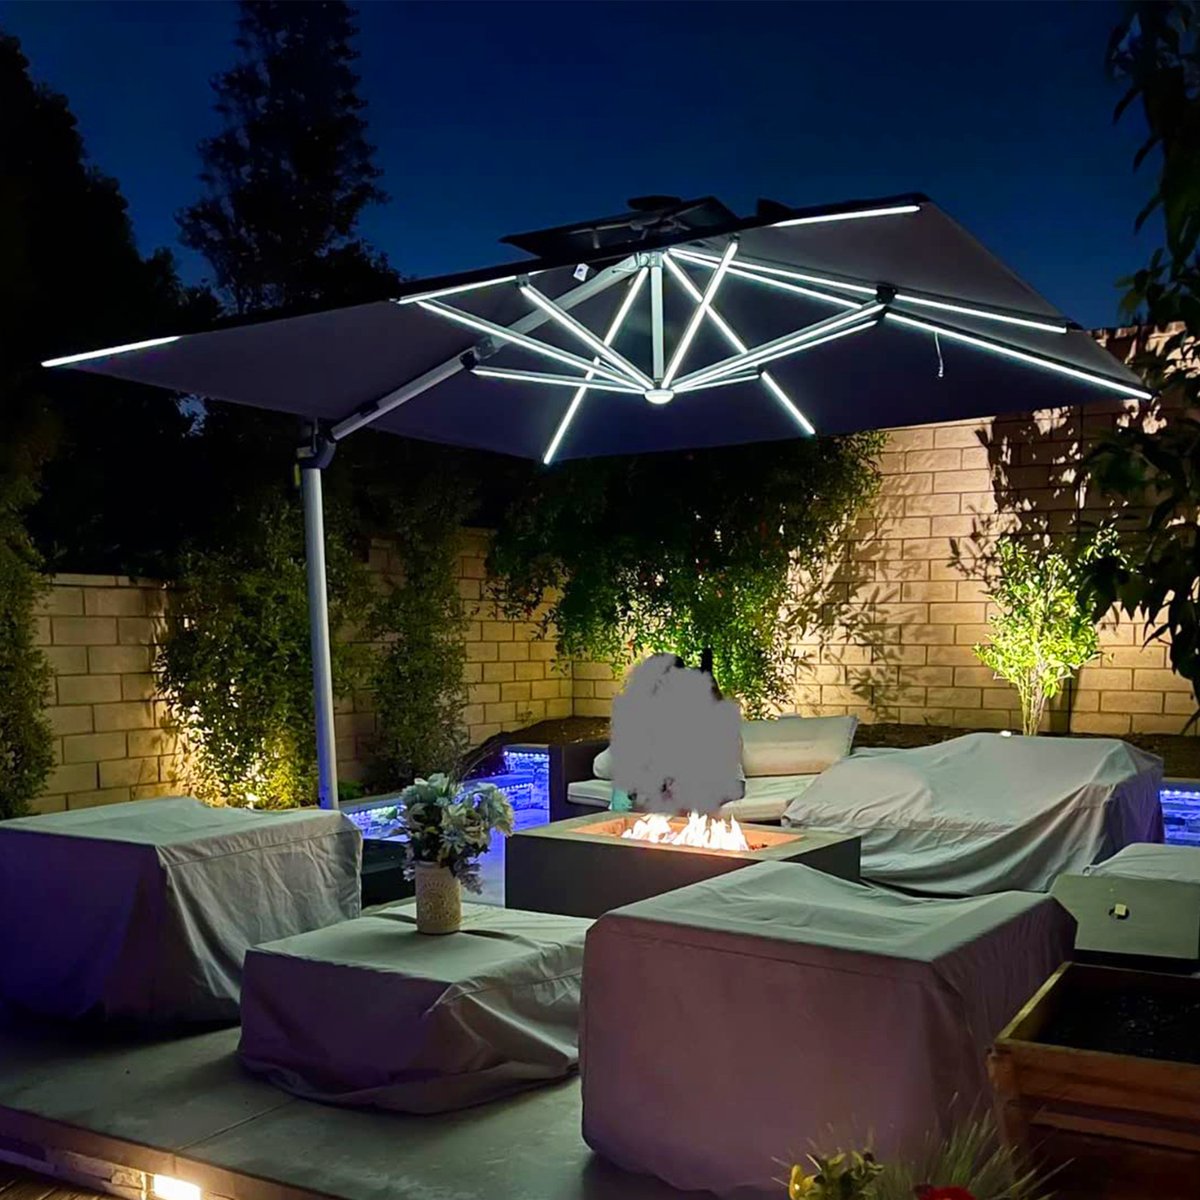 Not afraid of the dark anymore! An umbrella crafted with Led lights, bringing you a unique nighttime experience.

#patiolife #PatioUmbrella #OutdoorLighting #OutdoorEntertaining  #outdoorliving #RelaxationStation 
#GardenDecor